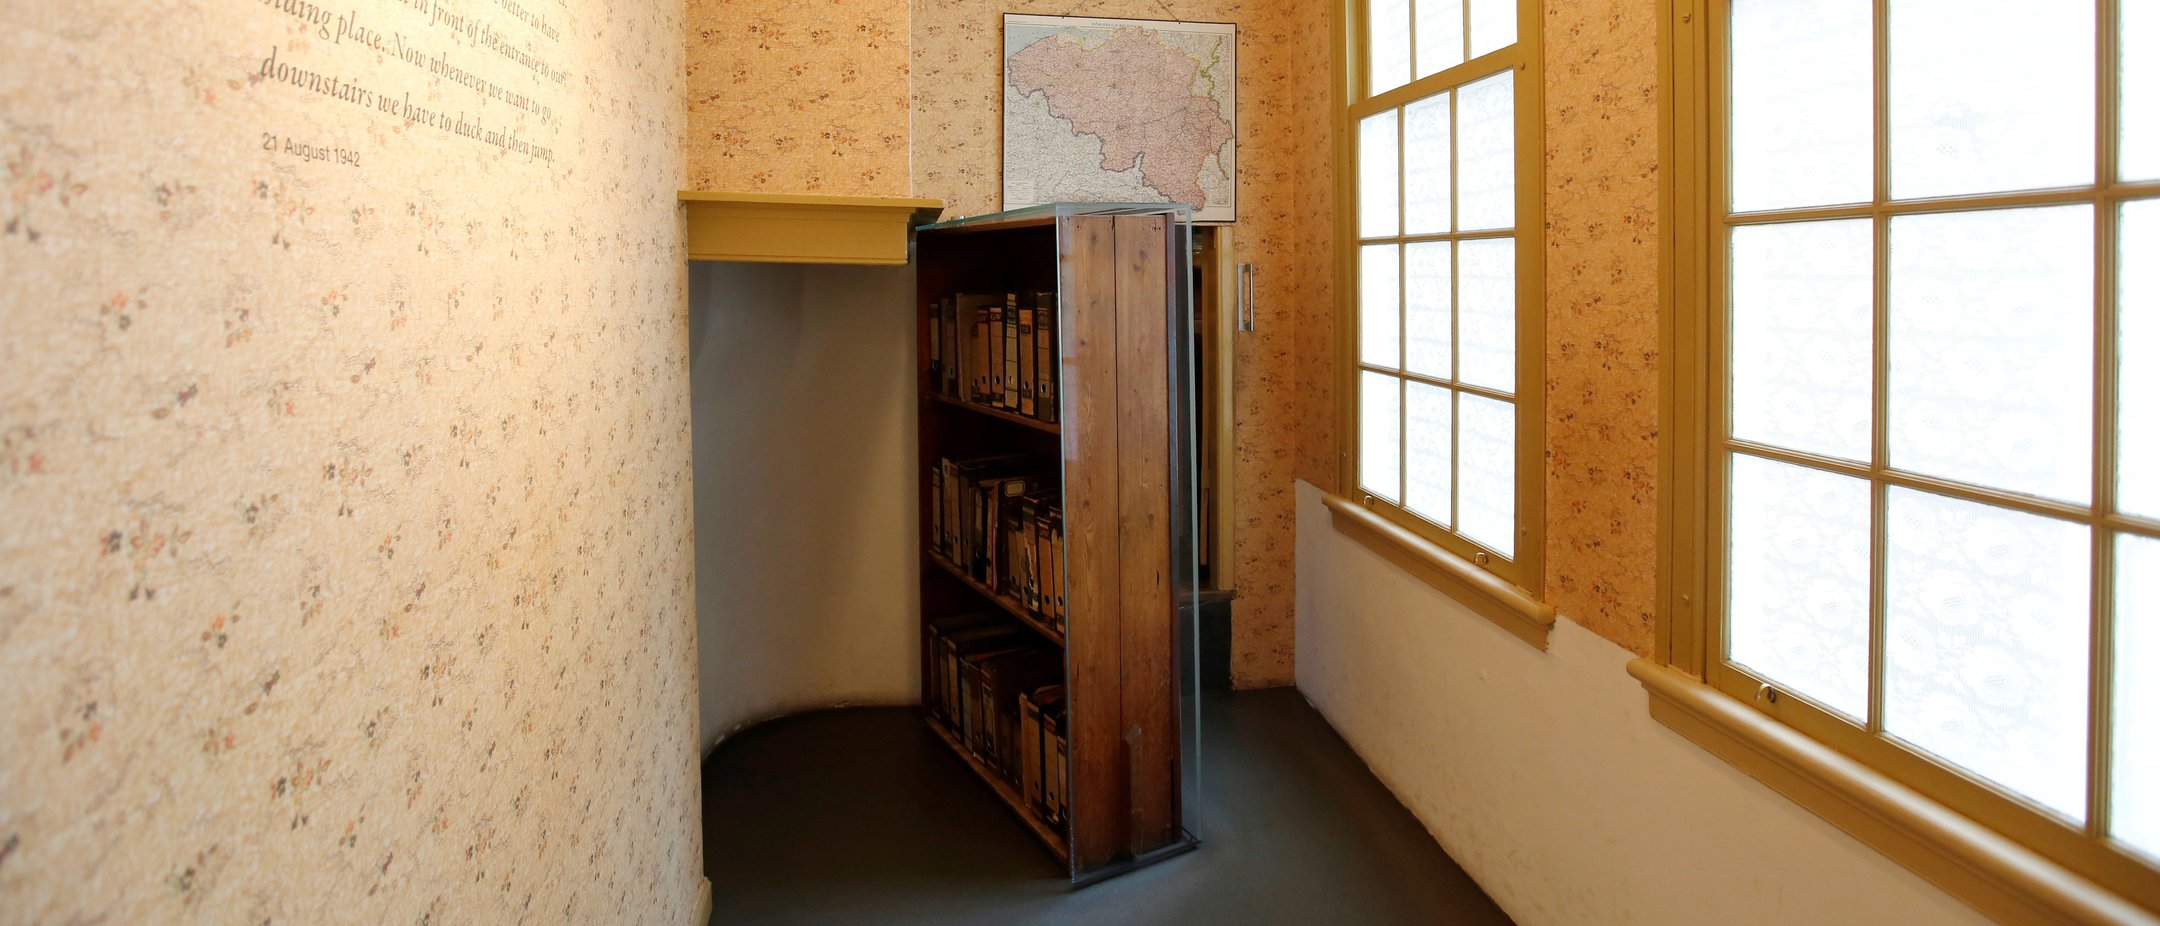 bookcase-at-anne-frank-house